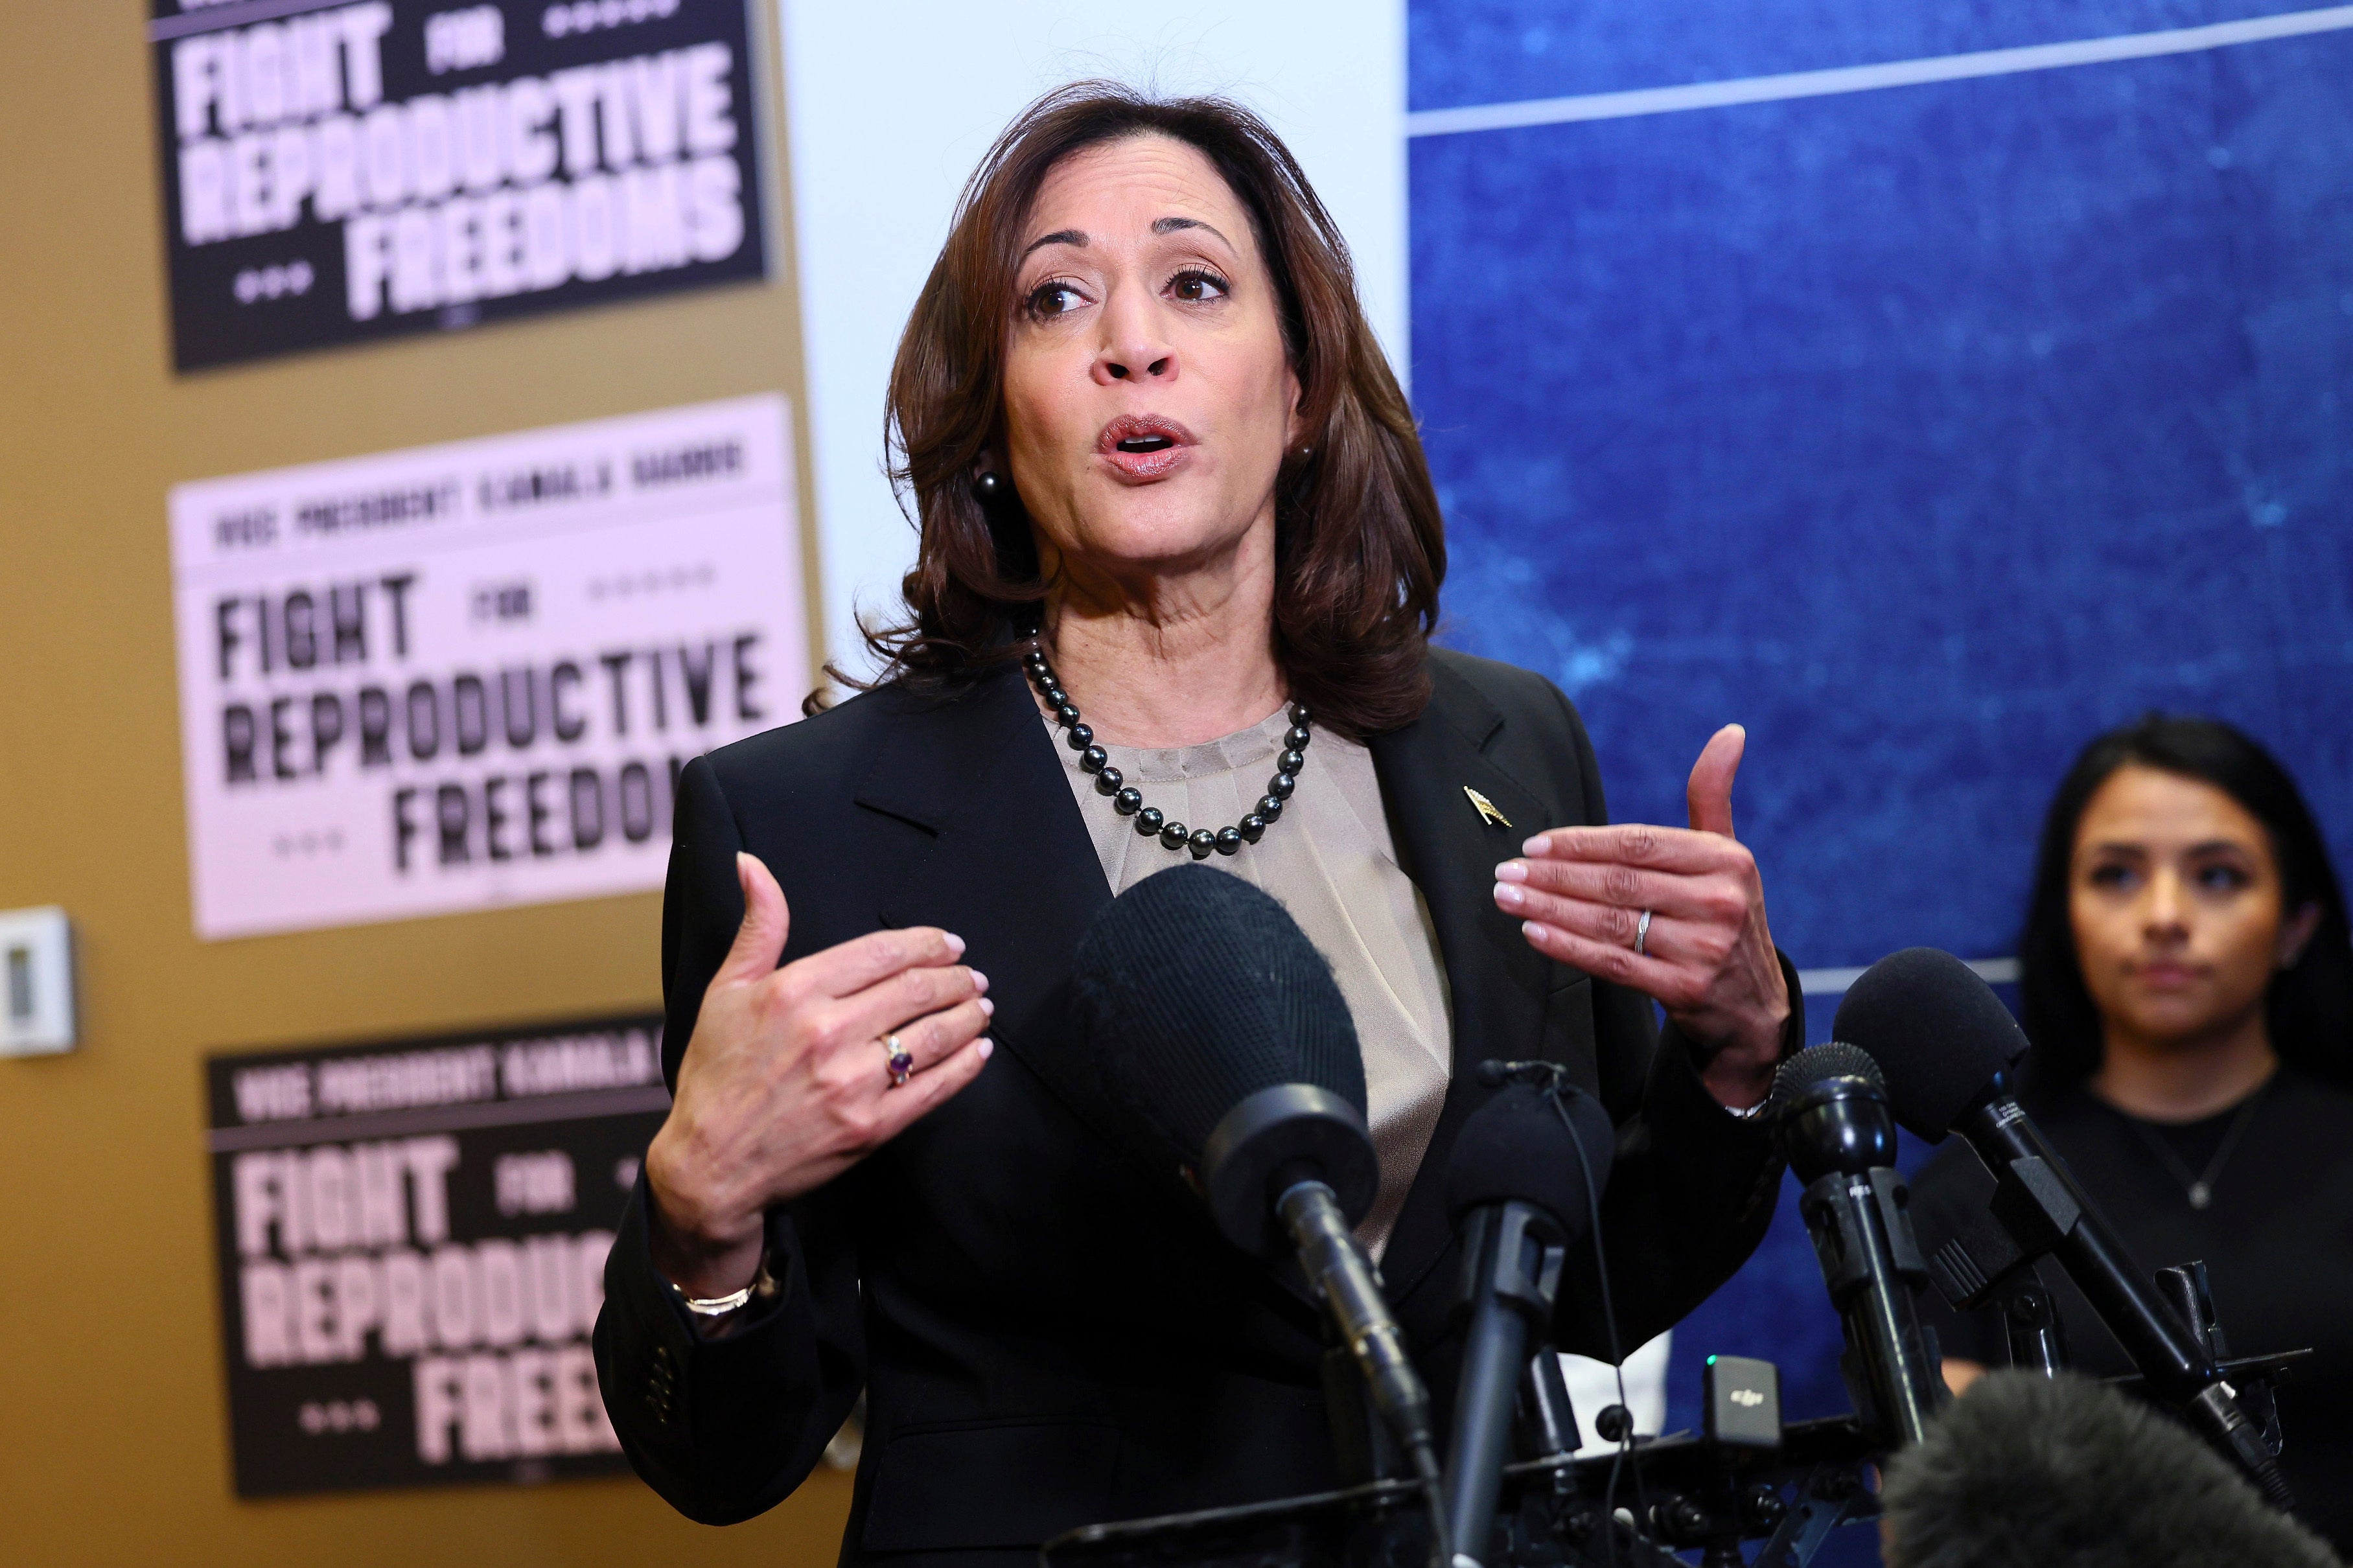 Vice president Kamala Harris would be the obvious person to step in to fill Biden’s shoes given her constitutional duties – but her own run for the nomination in 2020 was notably unsuccessful